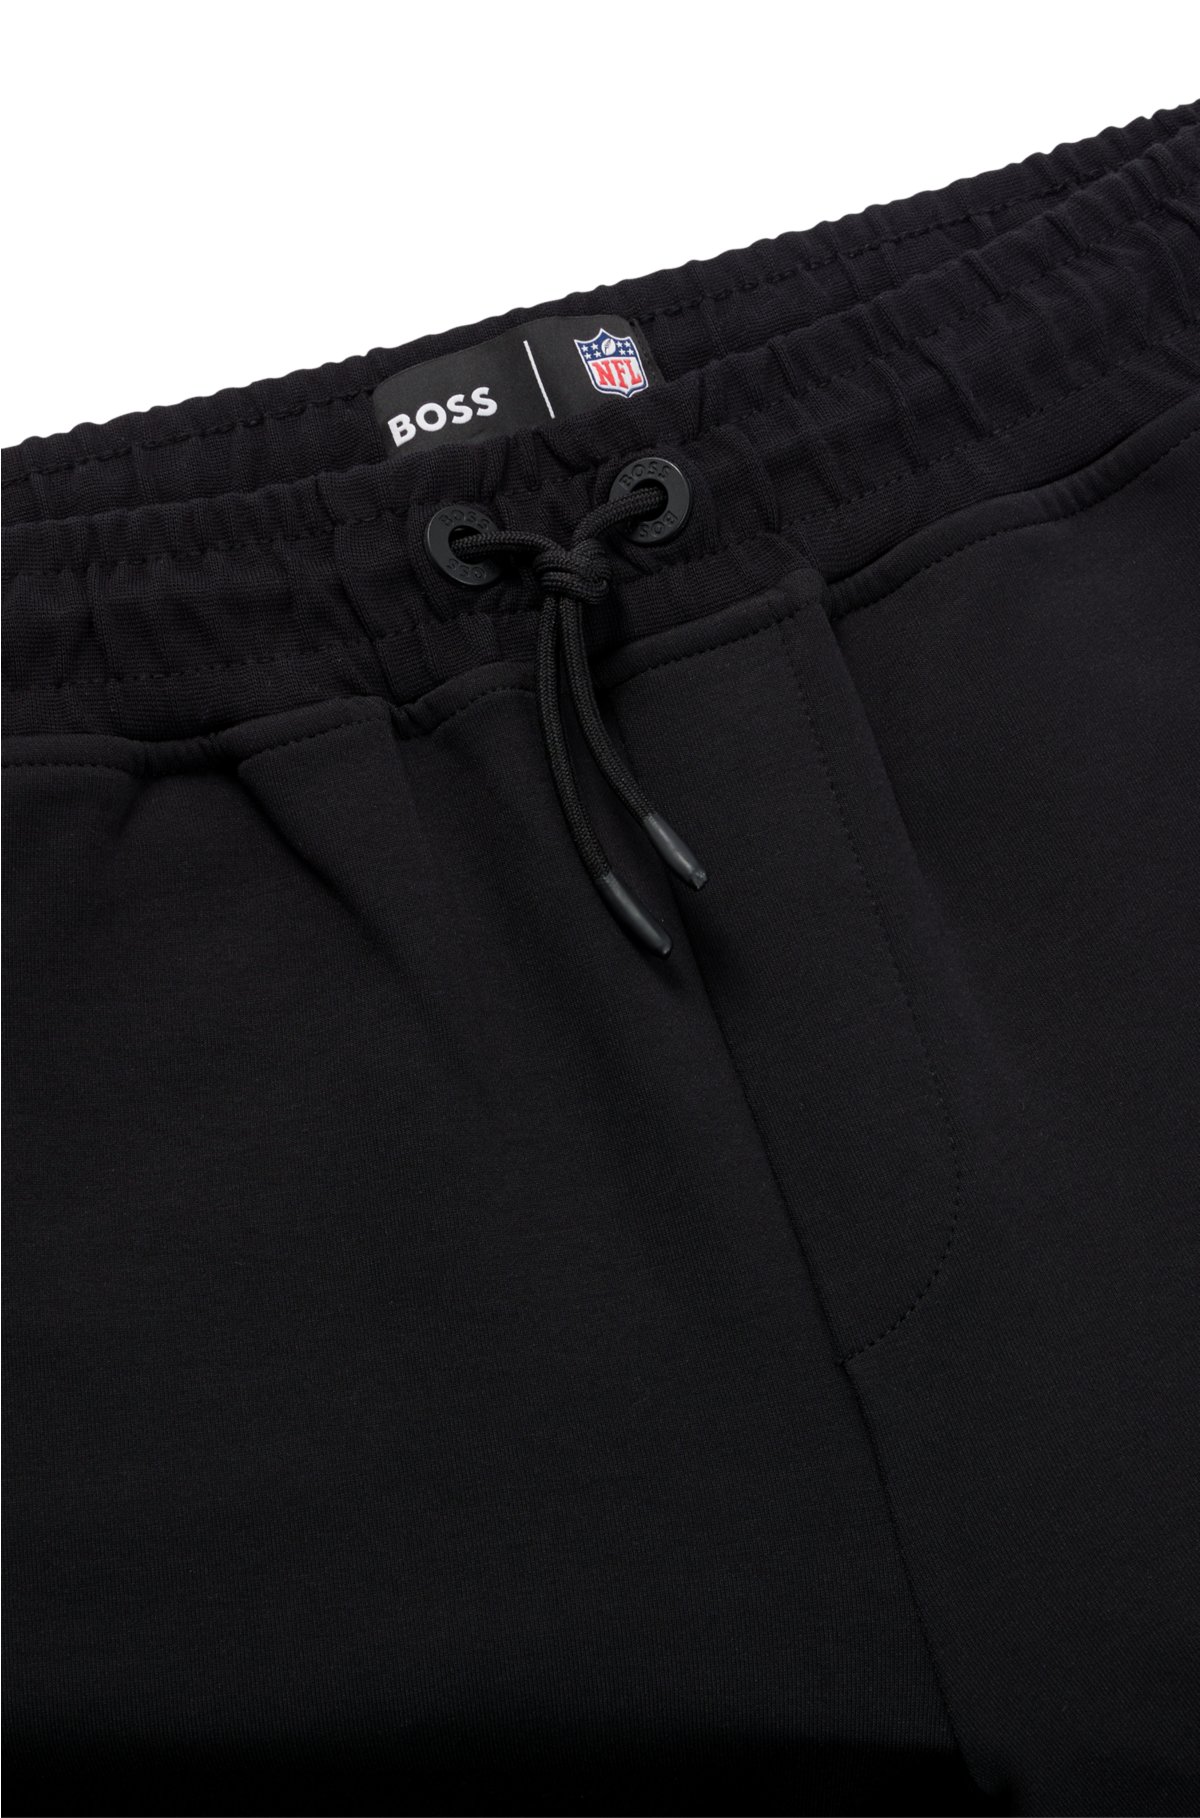 BOSS x NFL cotton-blend tracksuit bottoms with collaborative branding, Chiefs